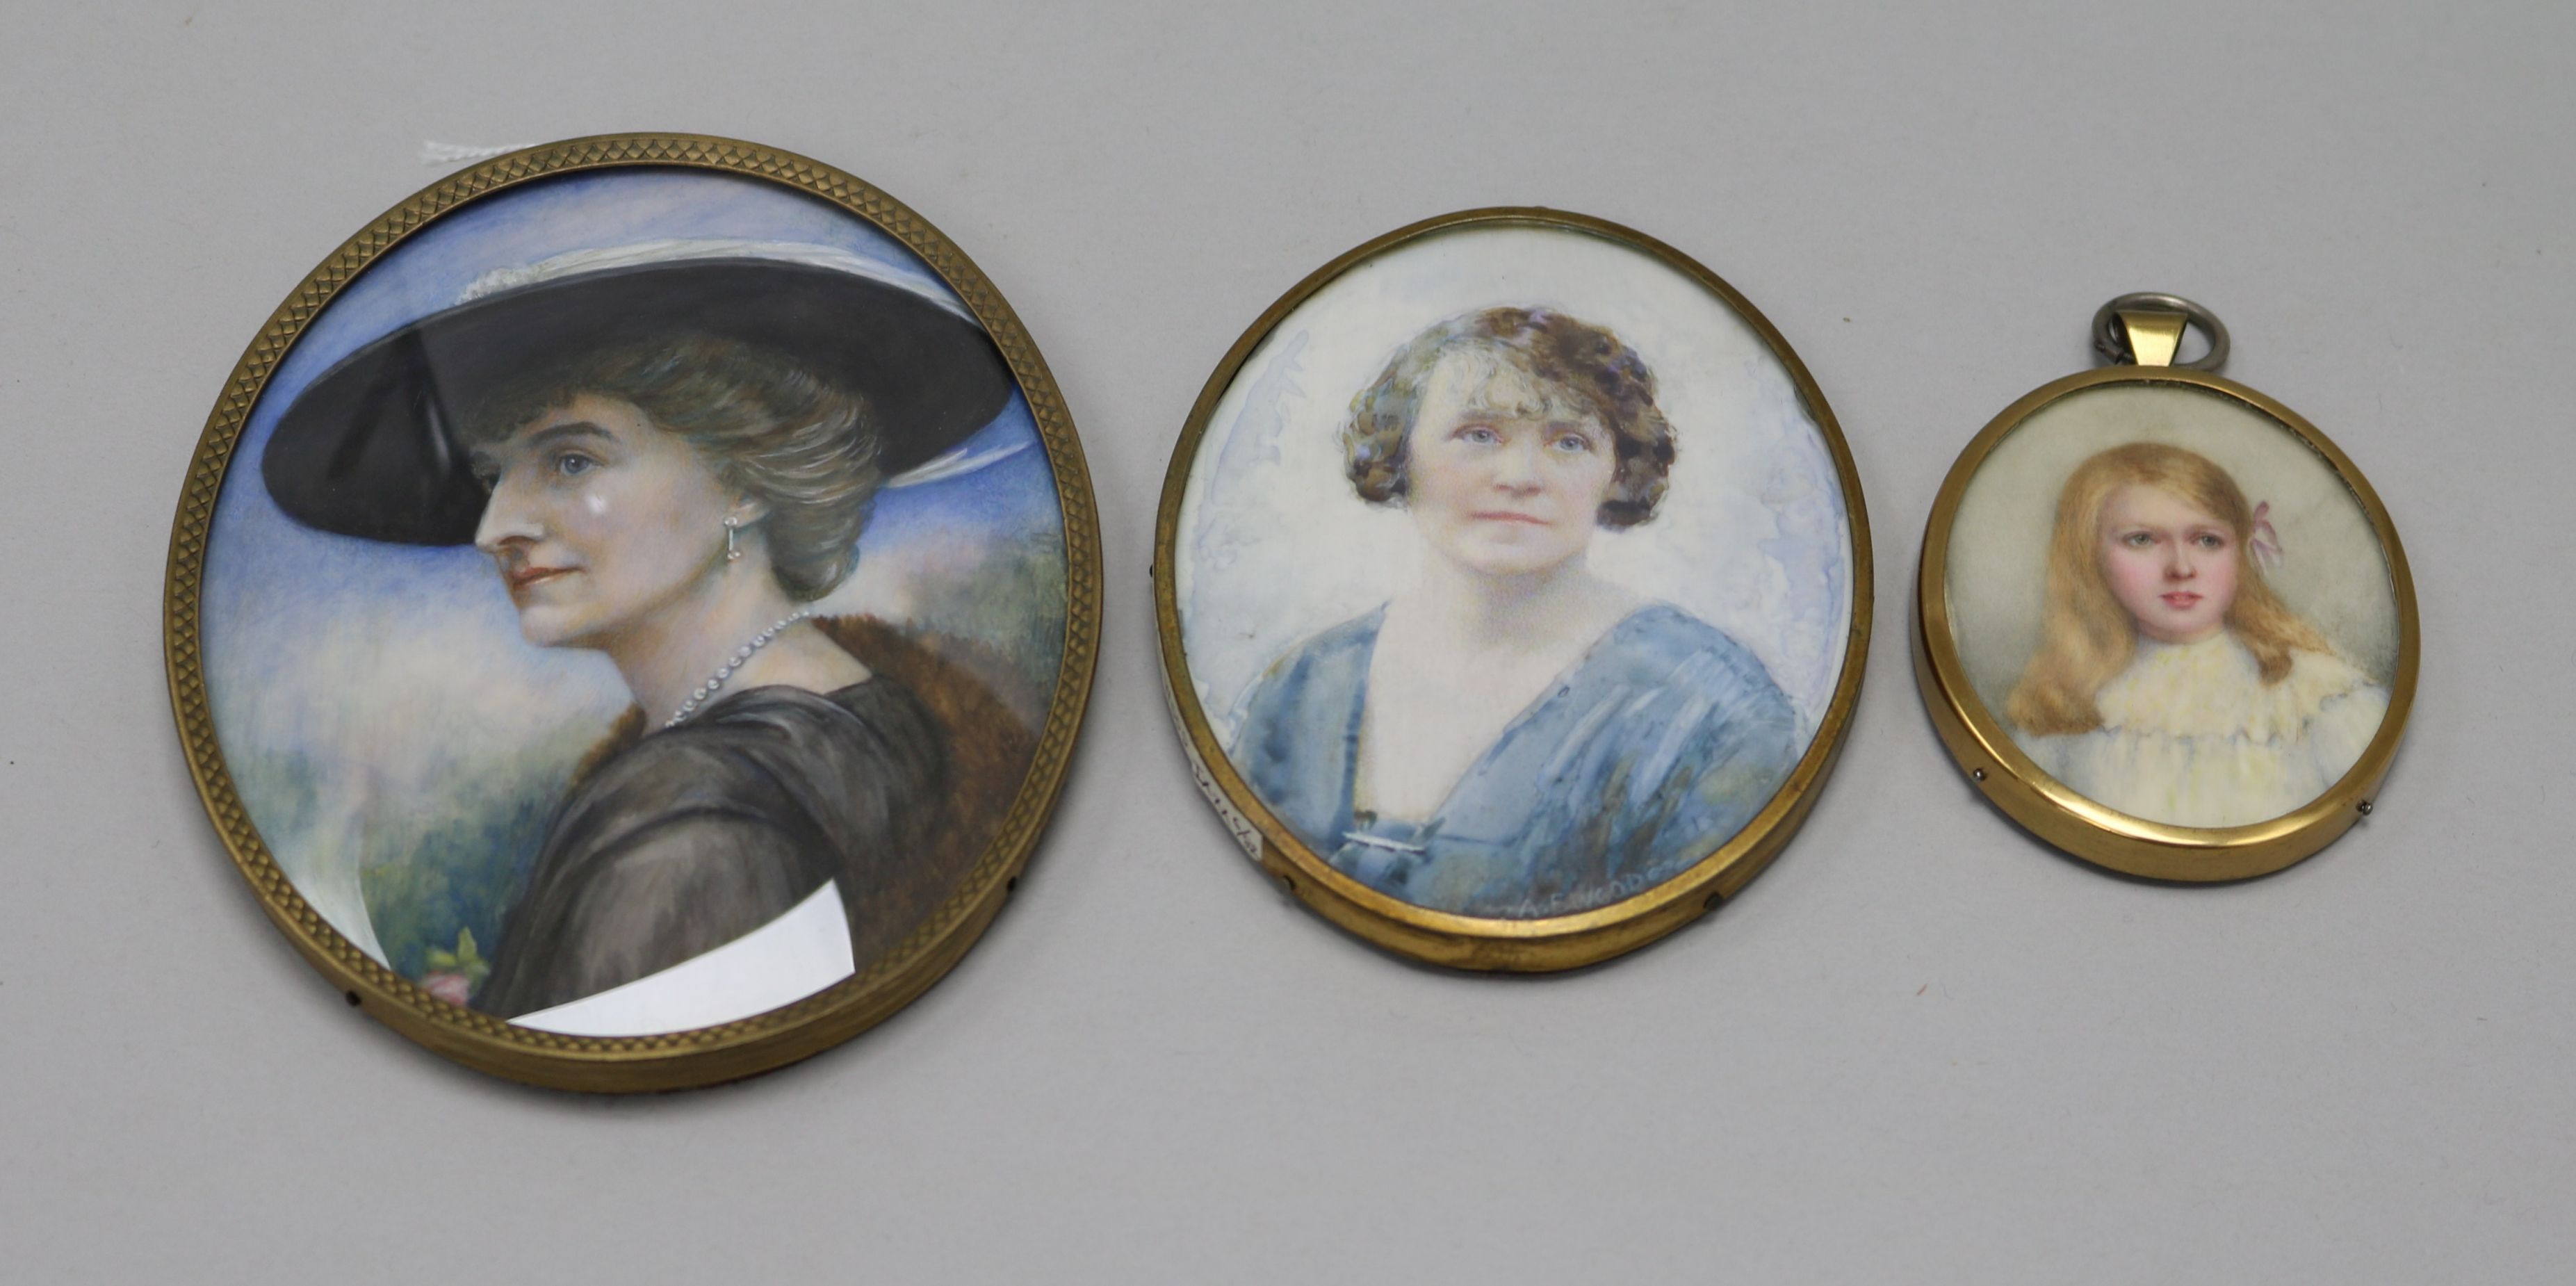 Three early 20thC portrait miniatures on ivory of ladies largest 12 x 9.5cm.